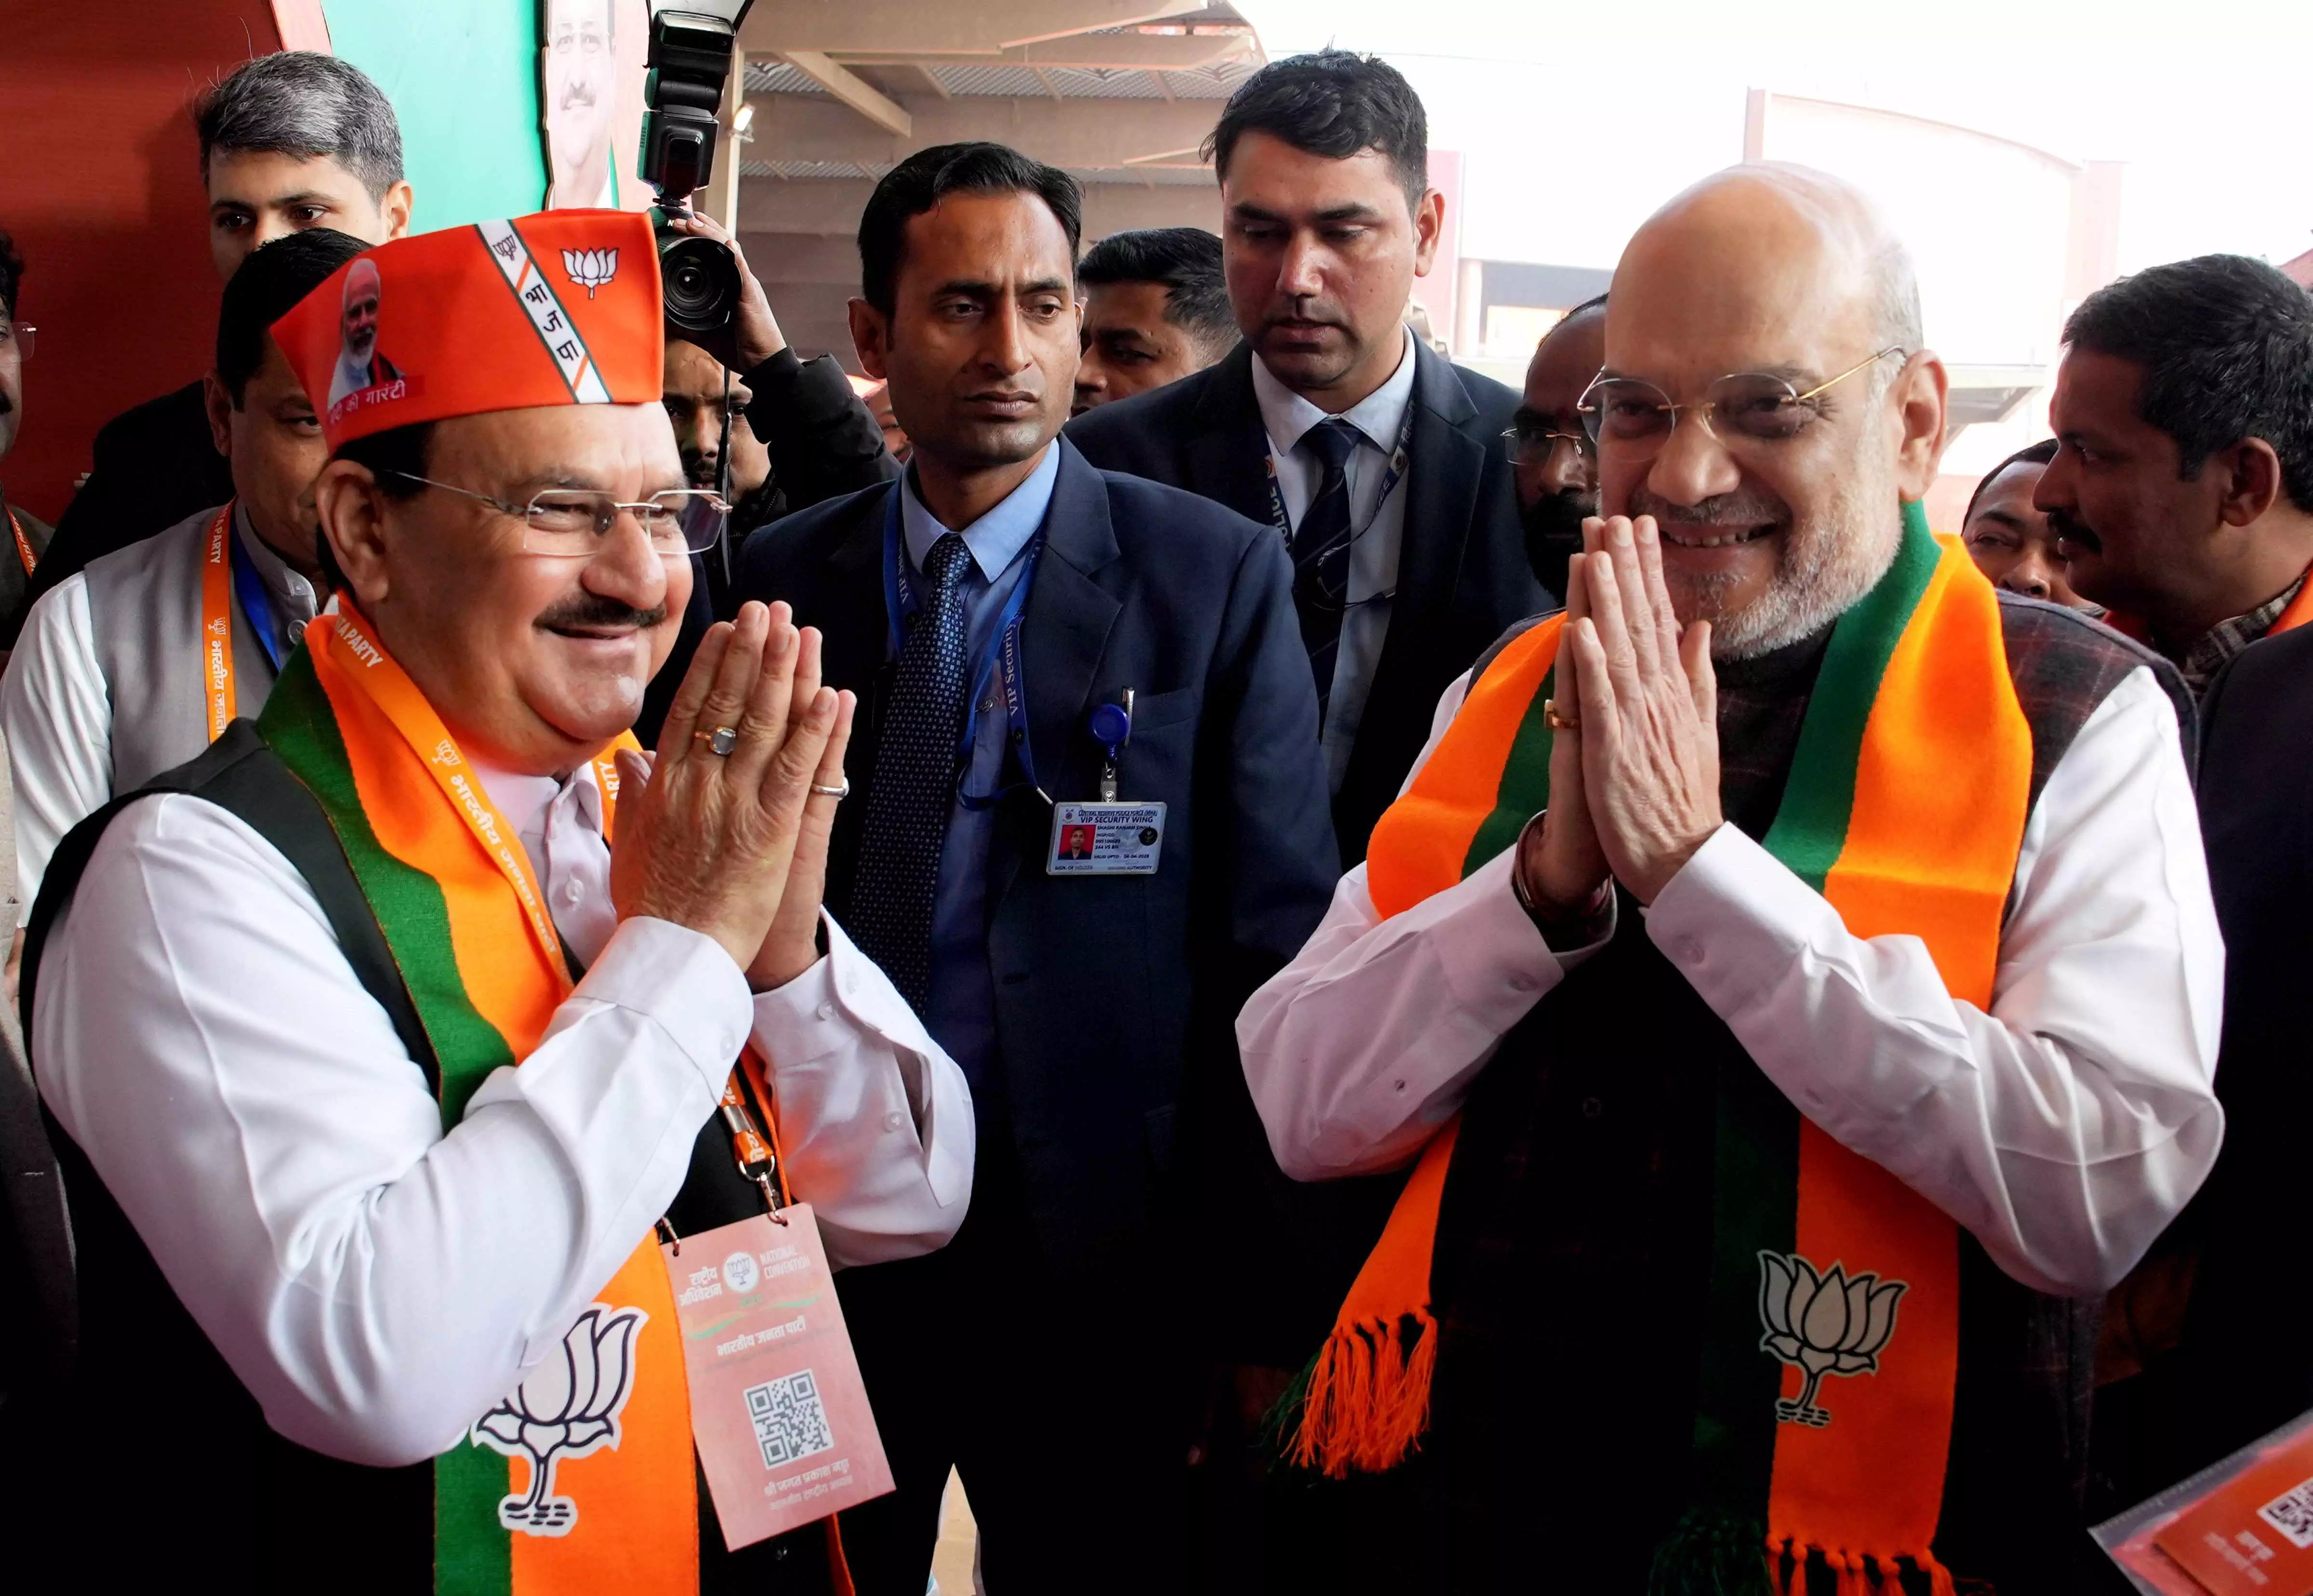 Country has made up its mind that PM Modi will be at helm for 3rd term: Shah at BJP meet